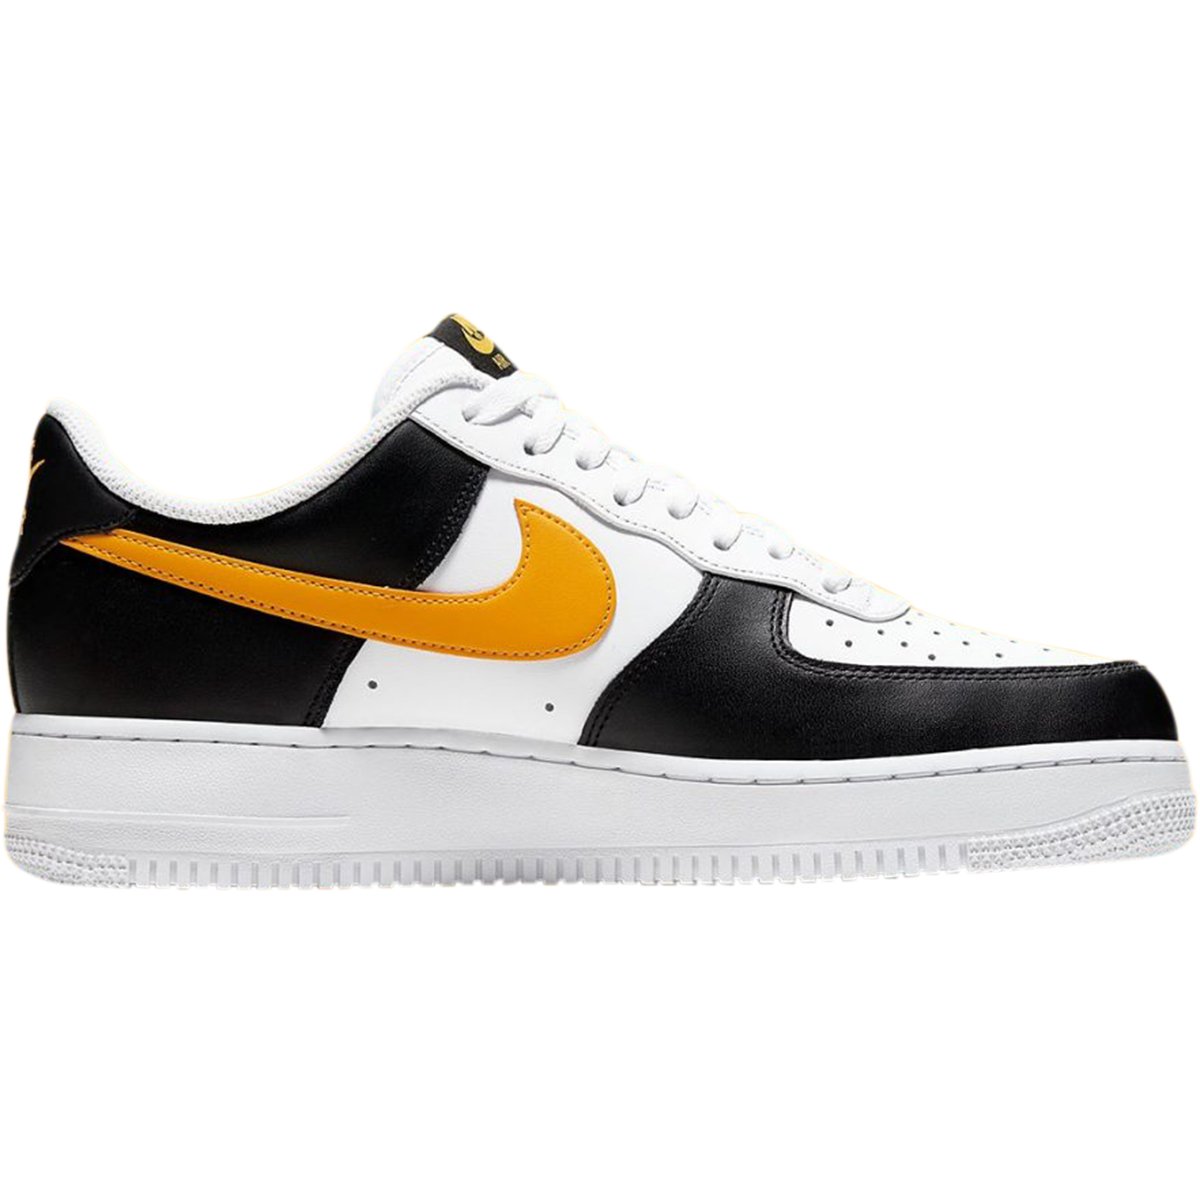 nike air force 1 low basketball shoes